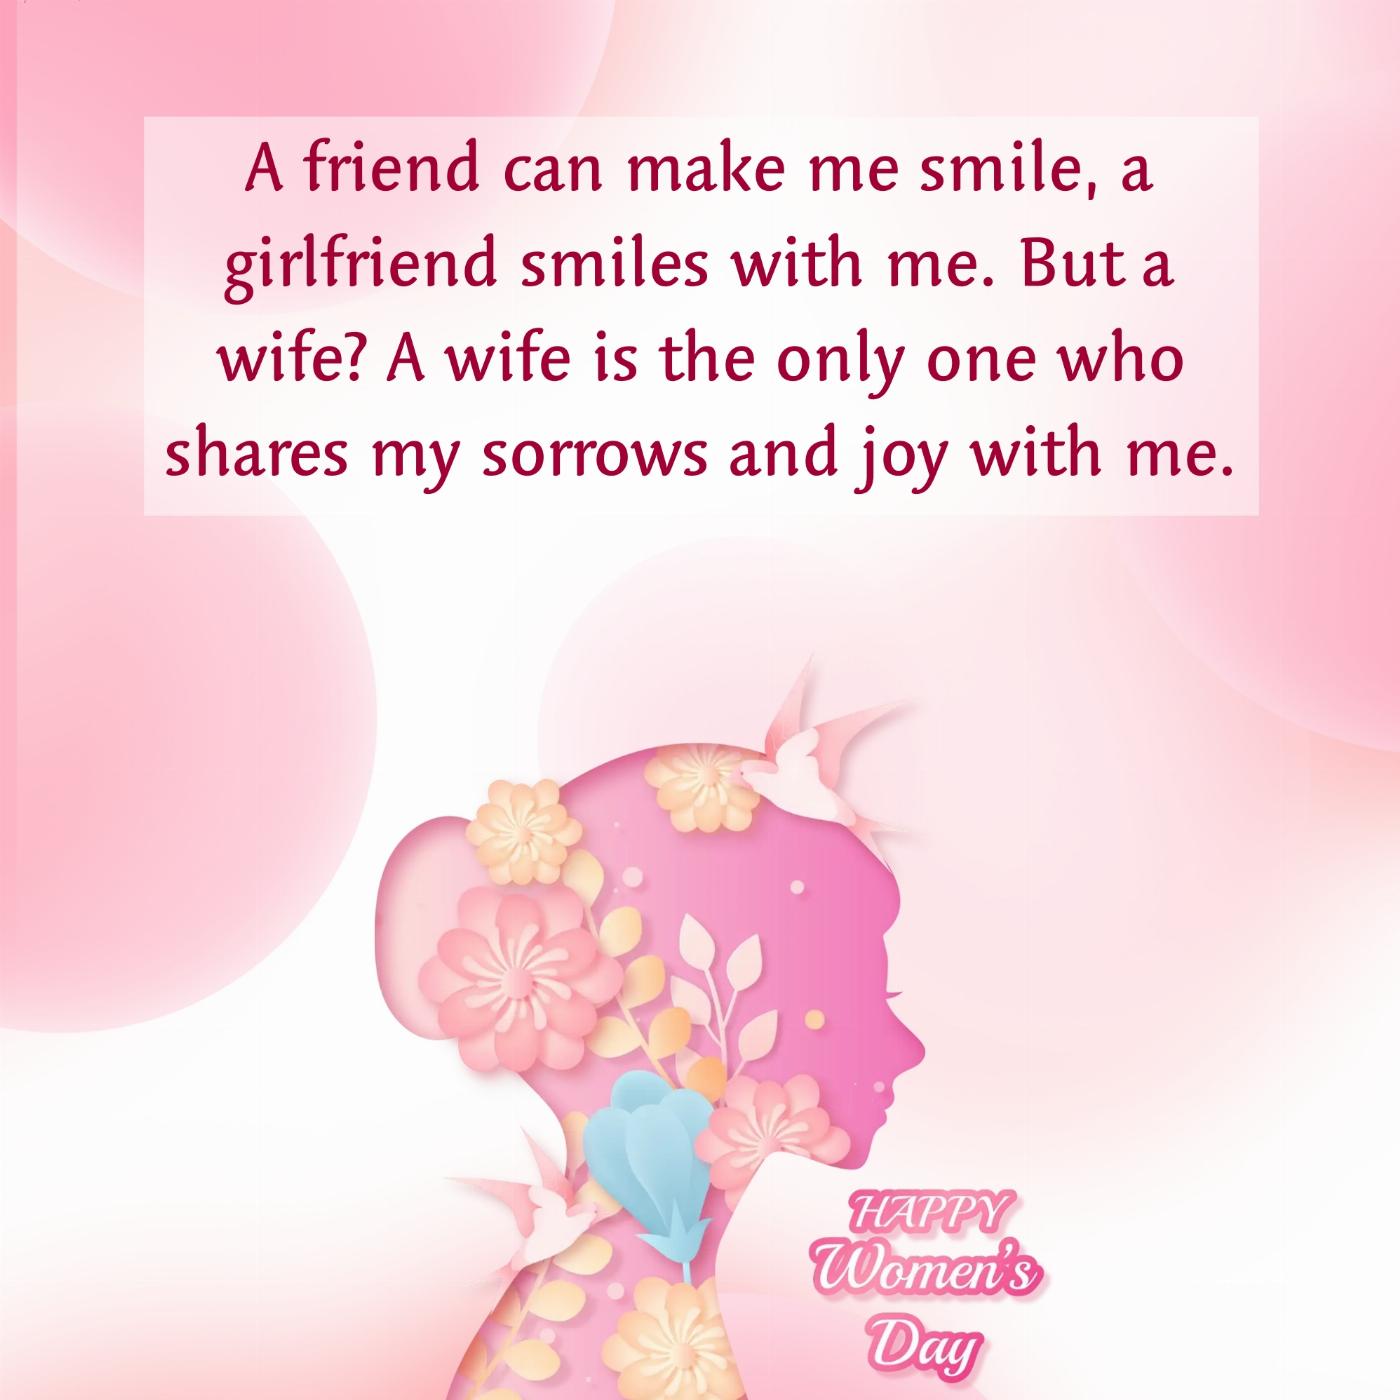 A friend can make me smile a girlfriend smiles with me